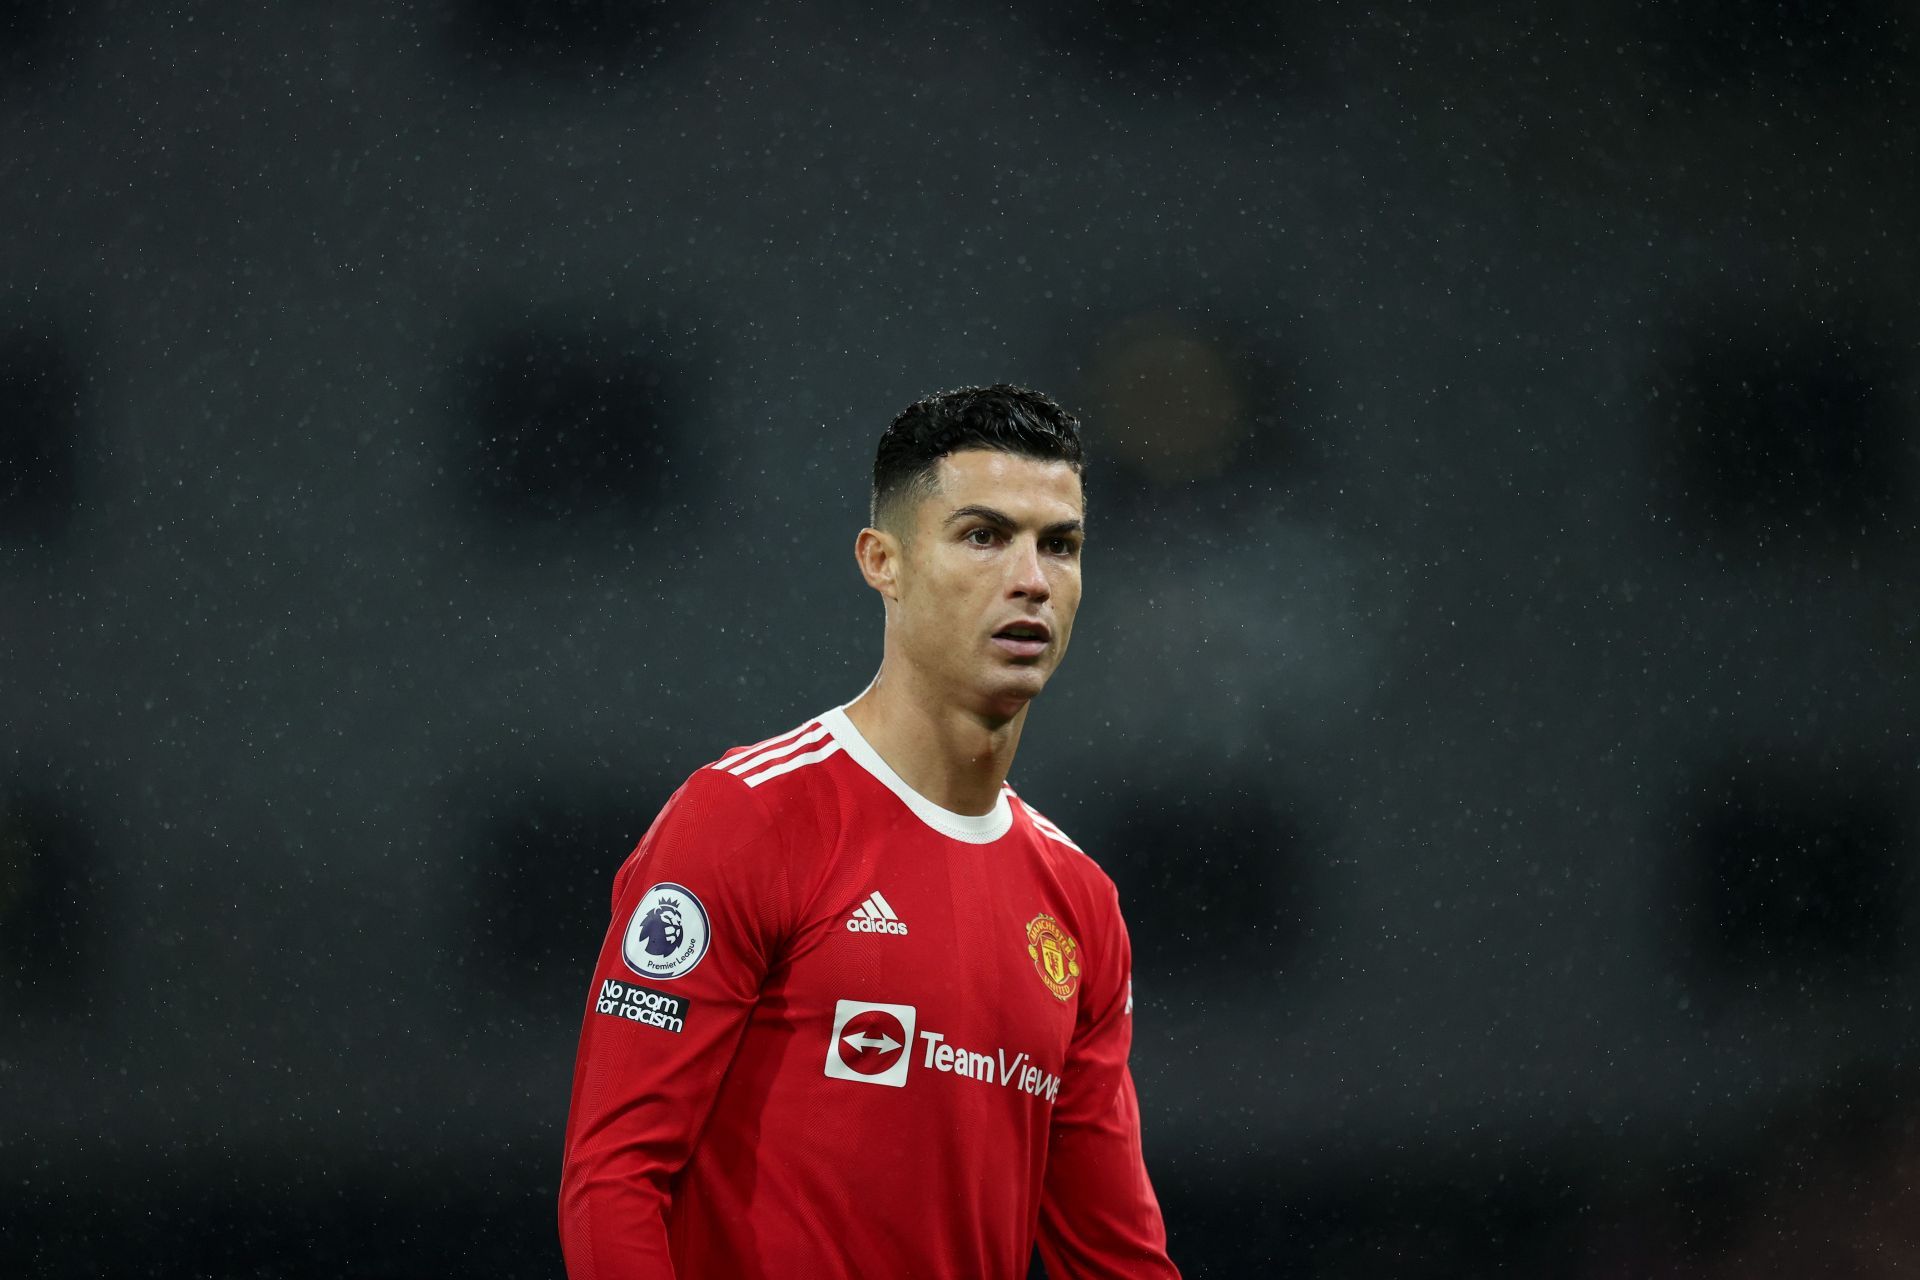 Jose Enrique believes Cristiano Ronaldo will have to adapt to Ralf Rangnick&rsquo;s tactics at Manchester United